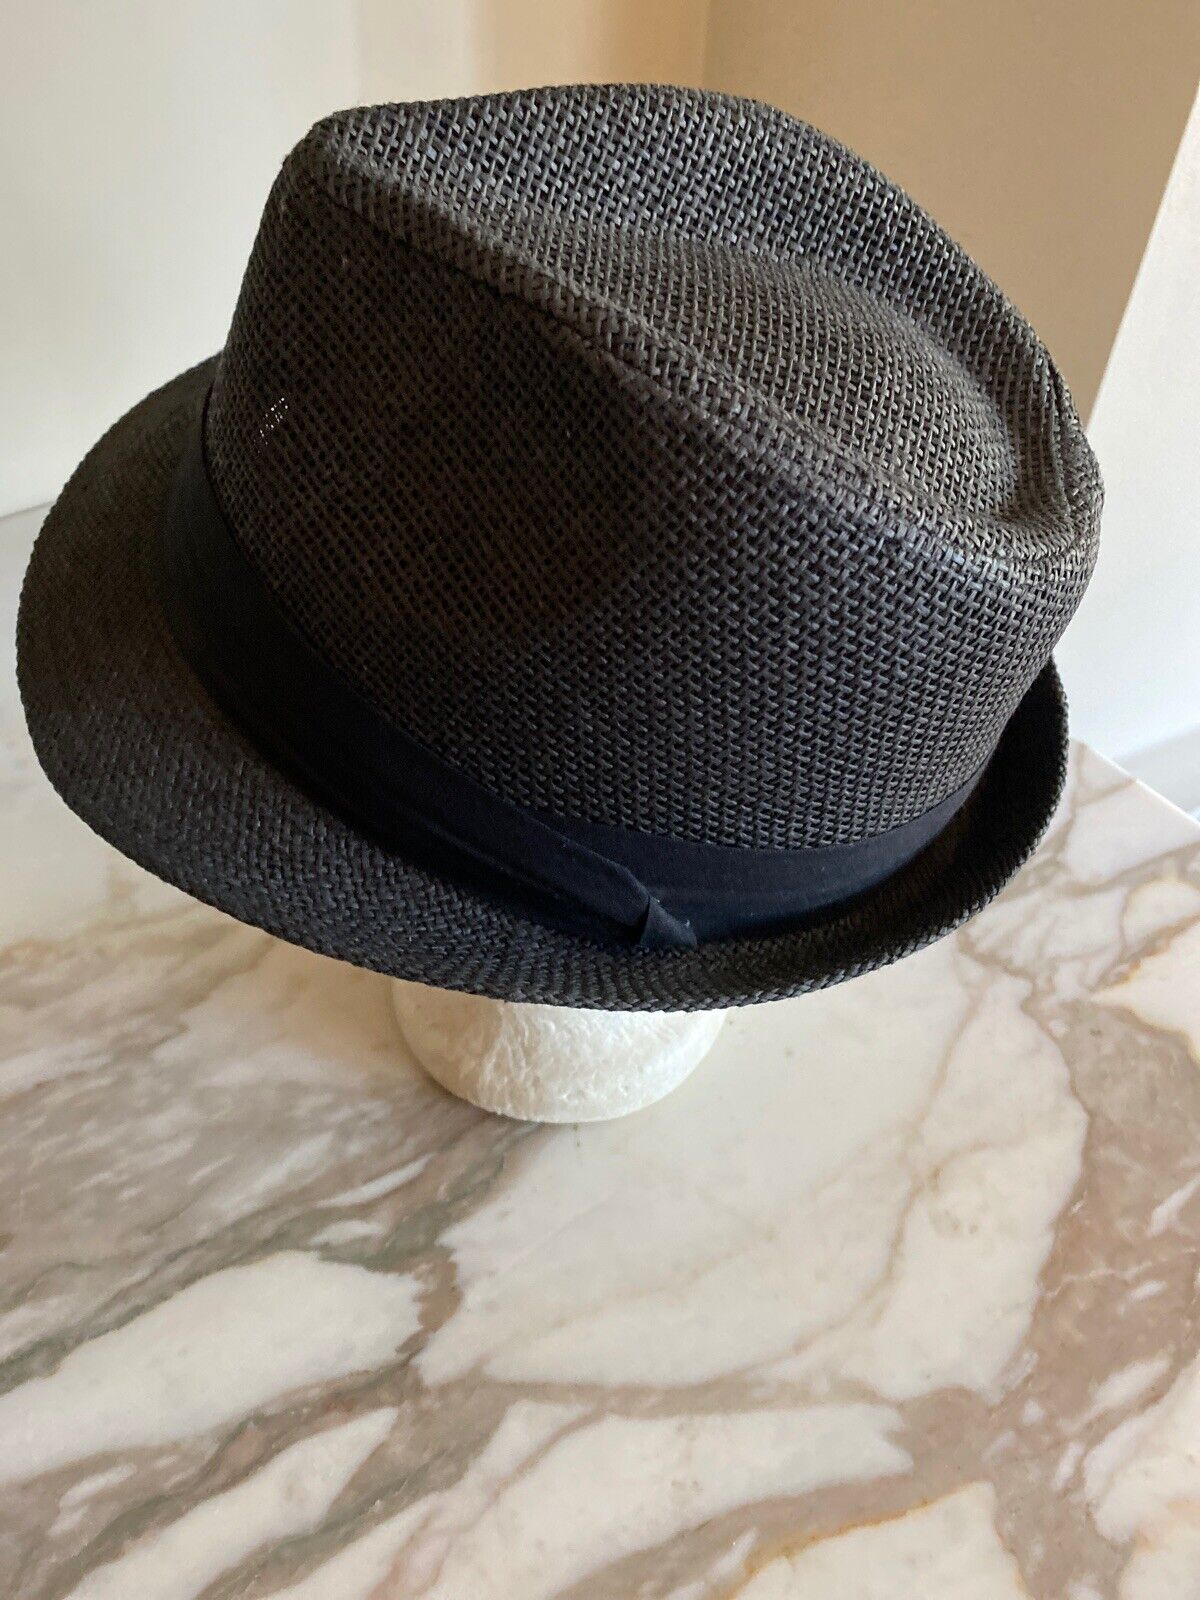 The Hatter Company Gray Fedora Straw Hat Cap Style 5143 |